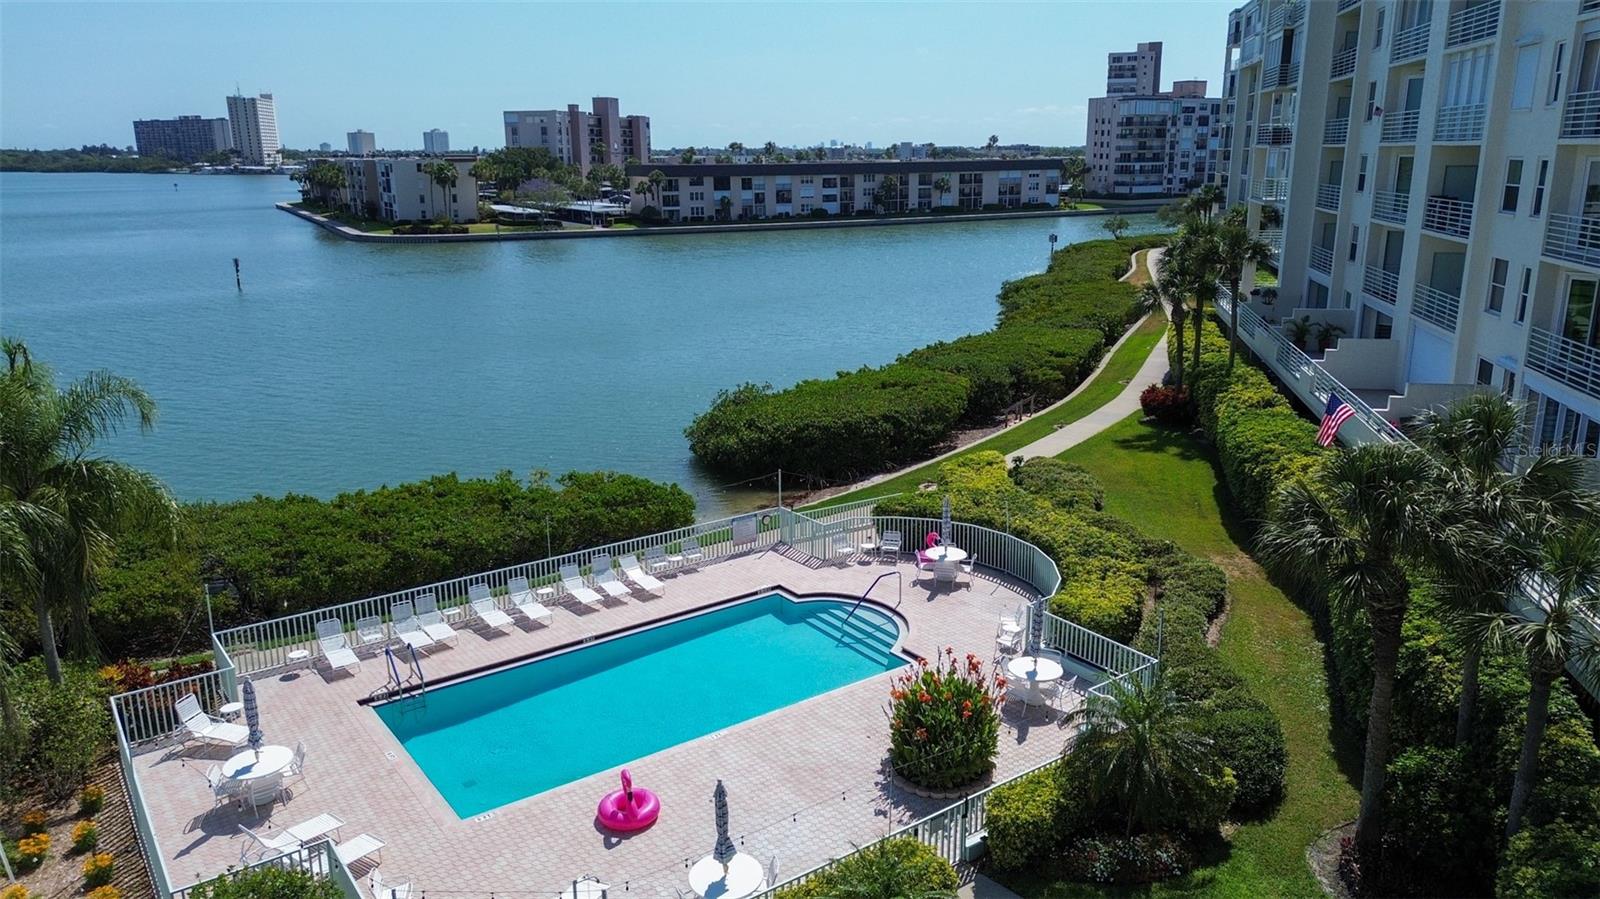 This pool, which is one of 6, is just a short walk from the condominium!